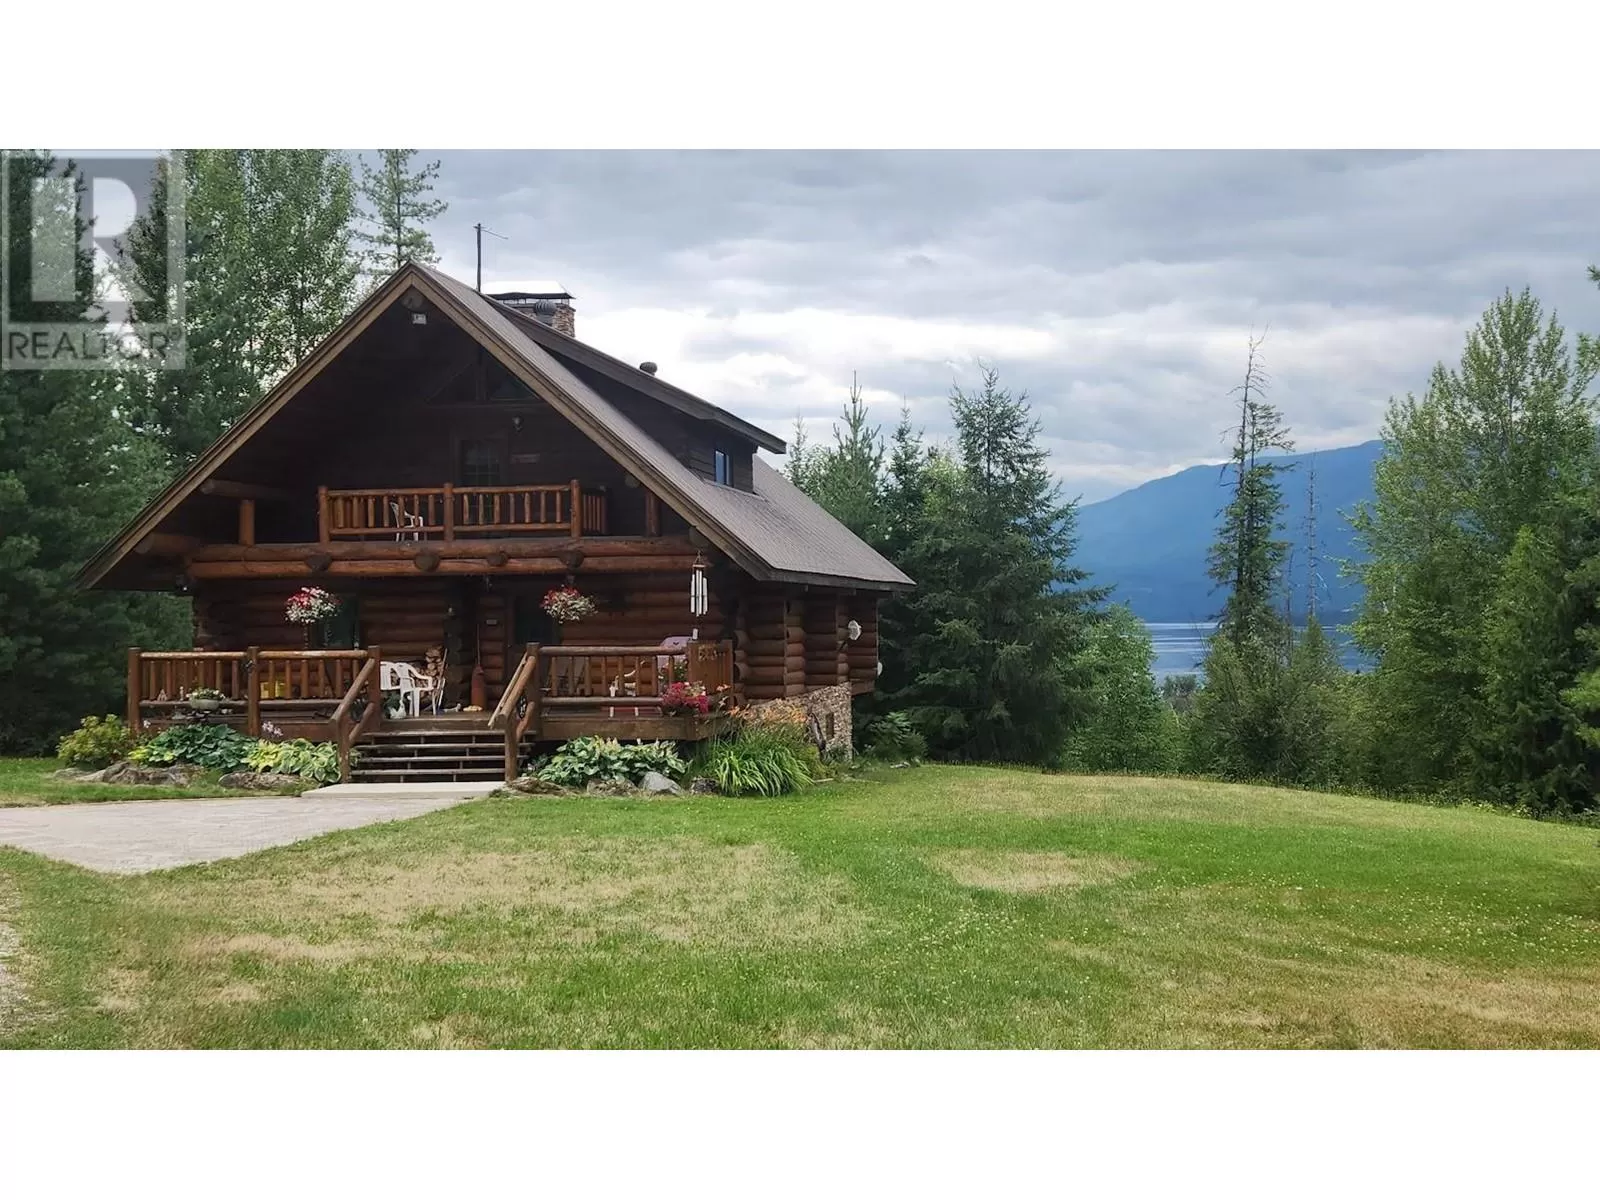 House for rent: 1361 Horning Road, Seymour Arm, British Columbia V0E 1M0